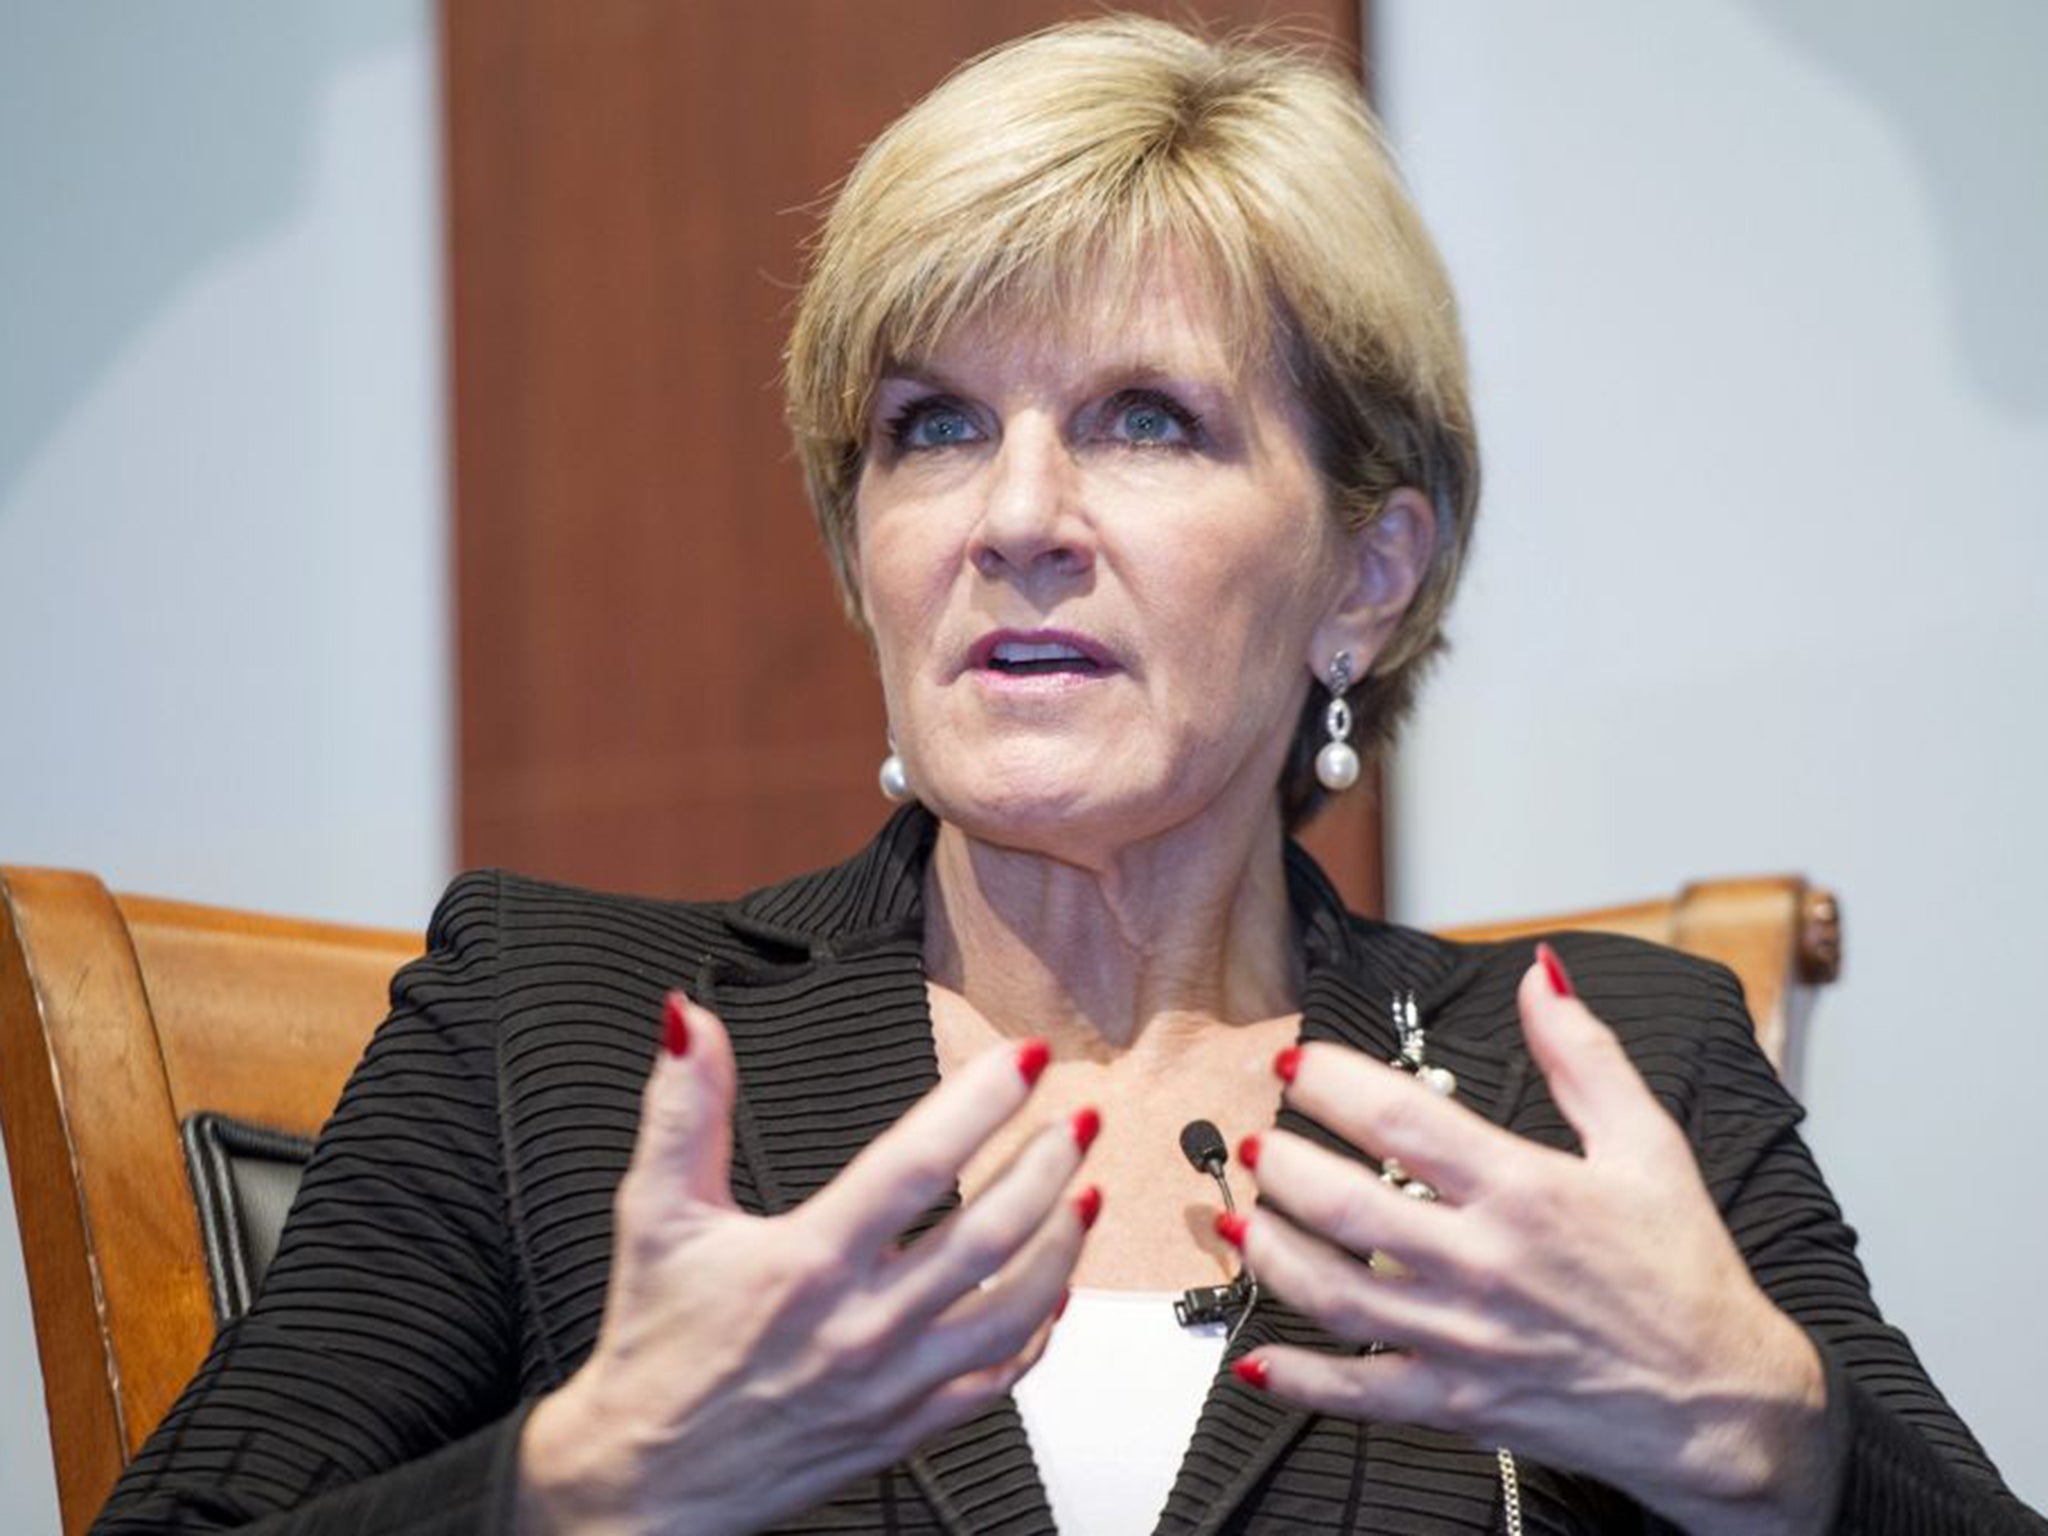 When Julie Bishop gave an interview to Buzzfeed earlier this year she composed her responses entirely of emoji